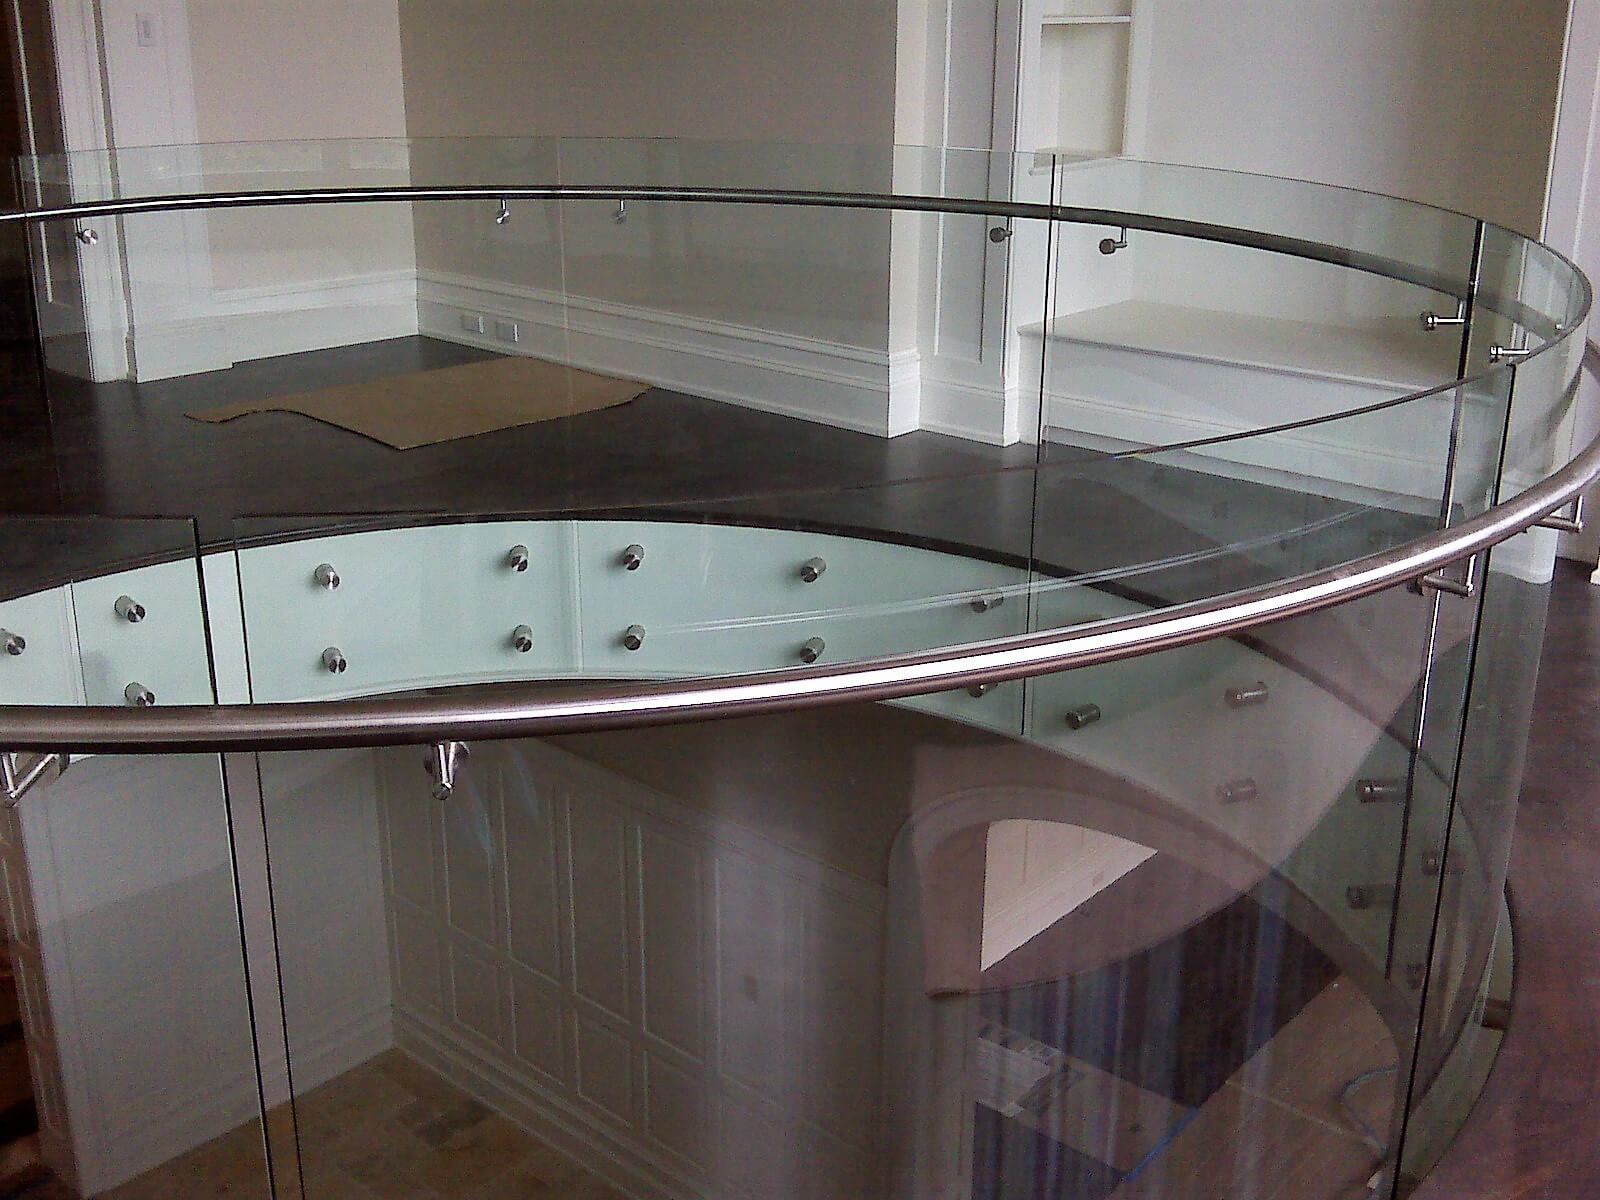 Second floor downward view in Private Residence, Washington DC, Optik guardrail with curved clear glass